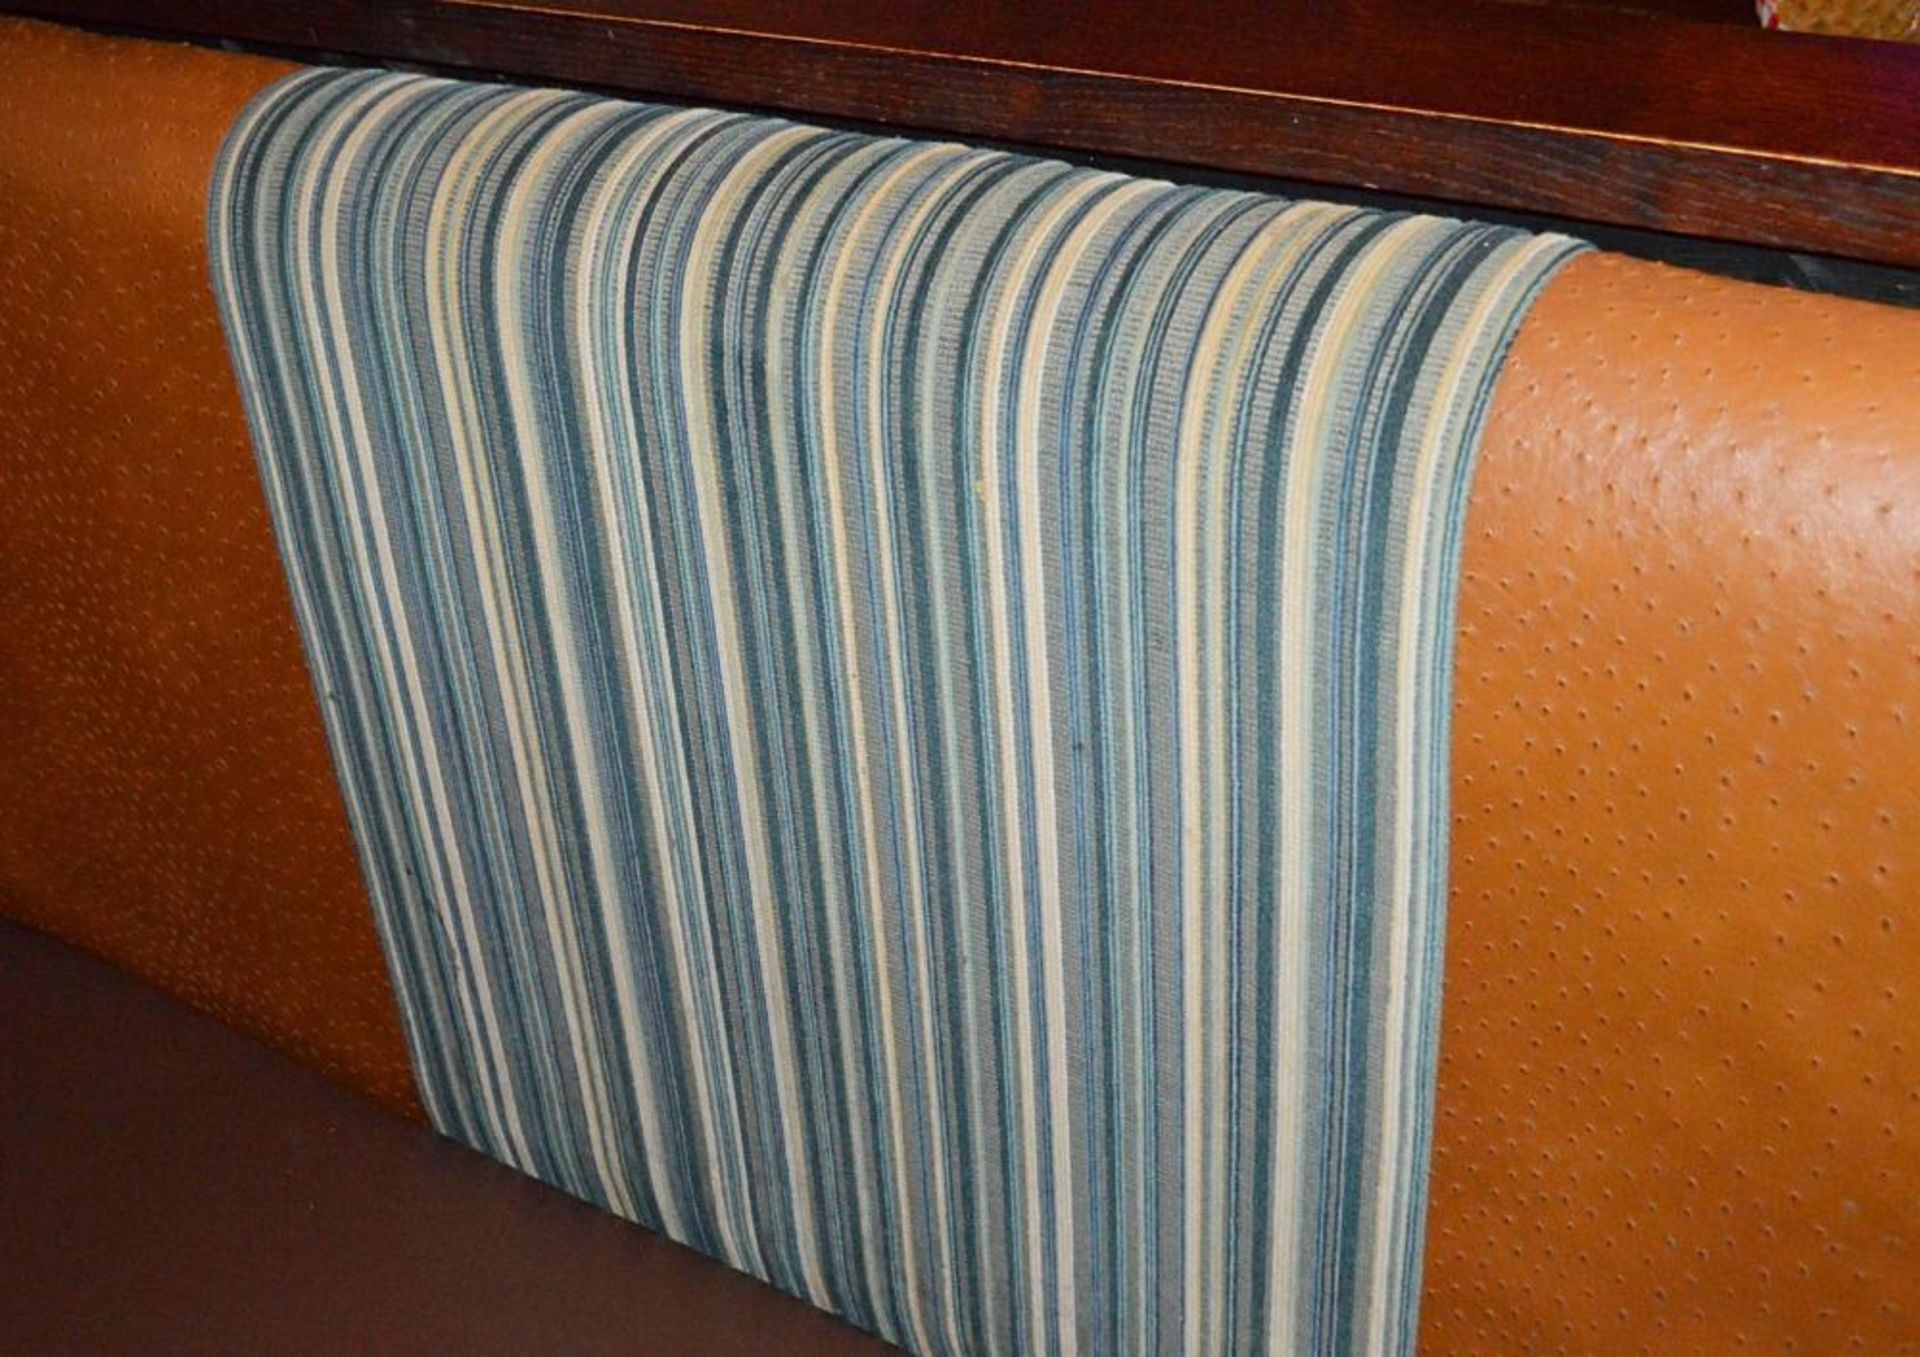 3 x Assorted Pieces Of Upholsted Restaurant Booth Seating - CL367 - Ref CQ-FB207 - Location: Manches - Image 7 of 7